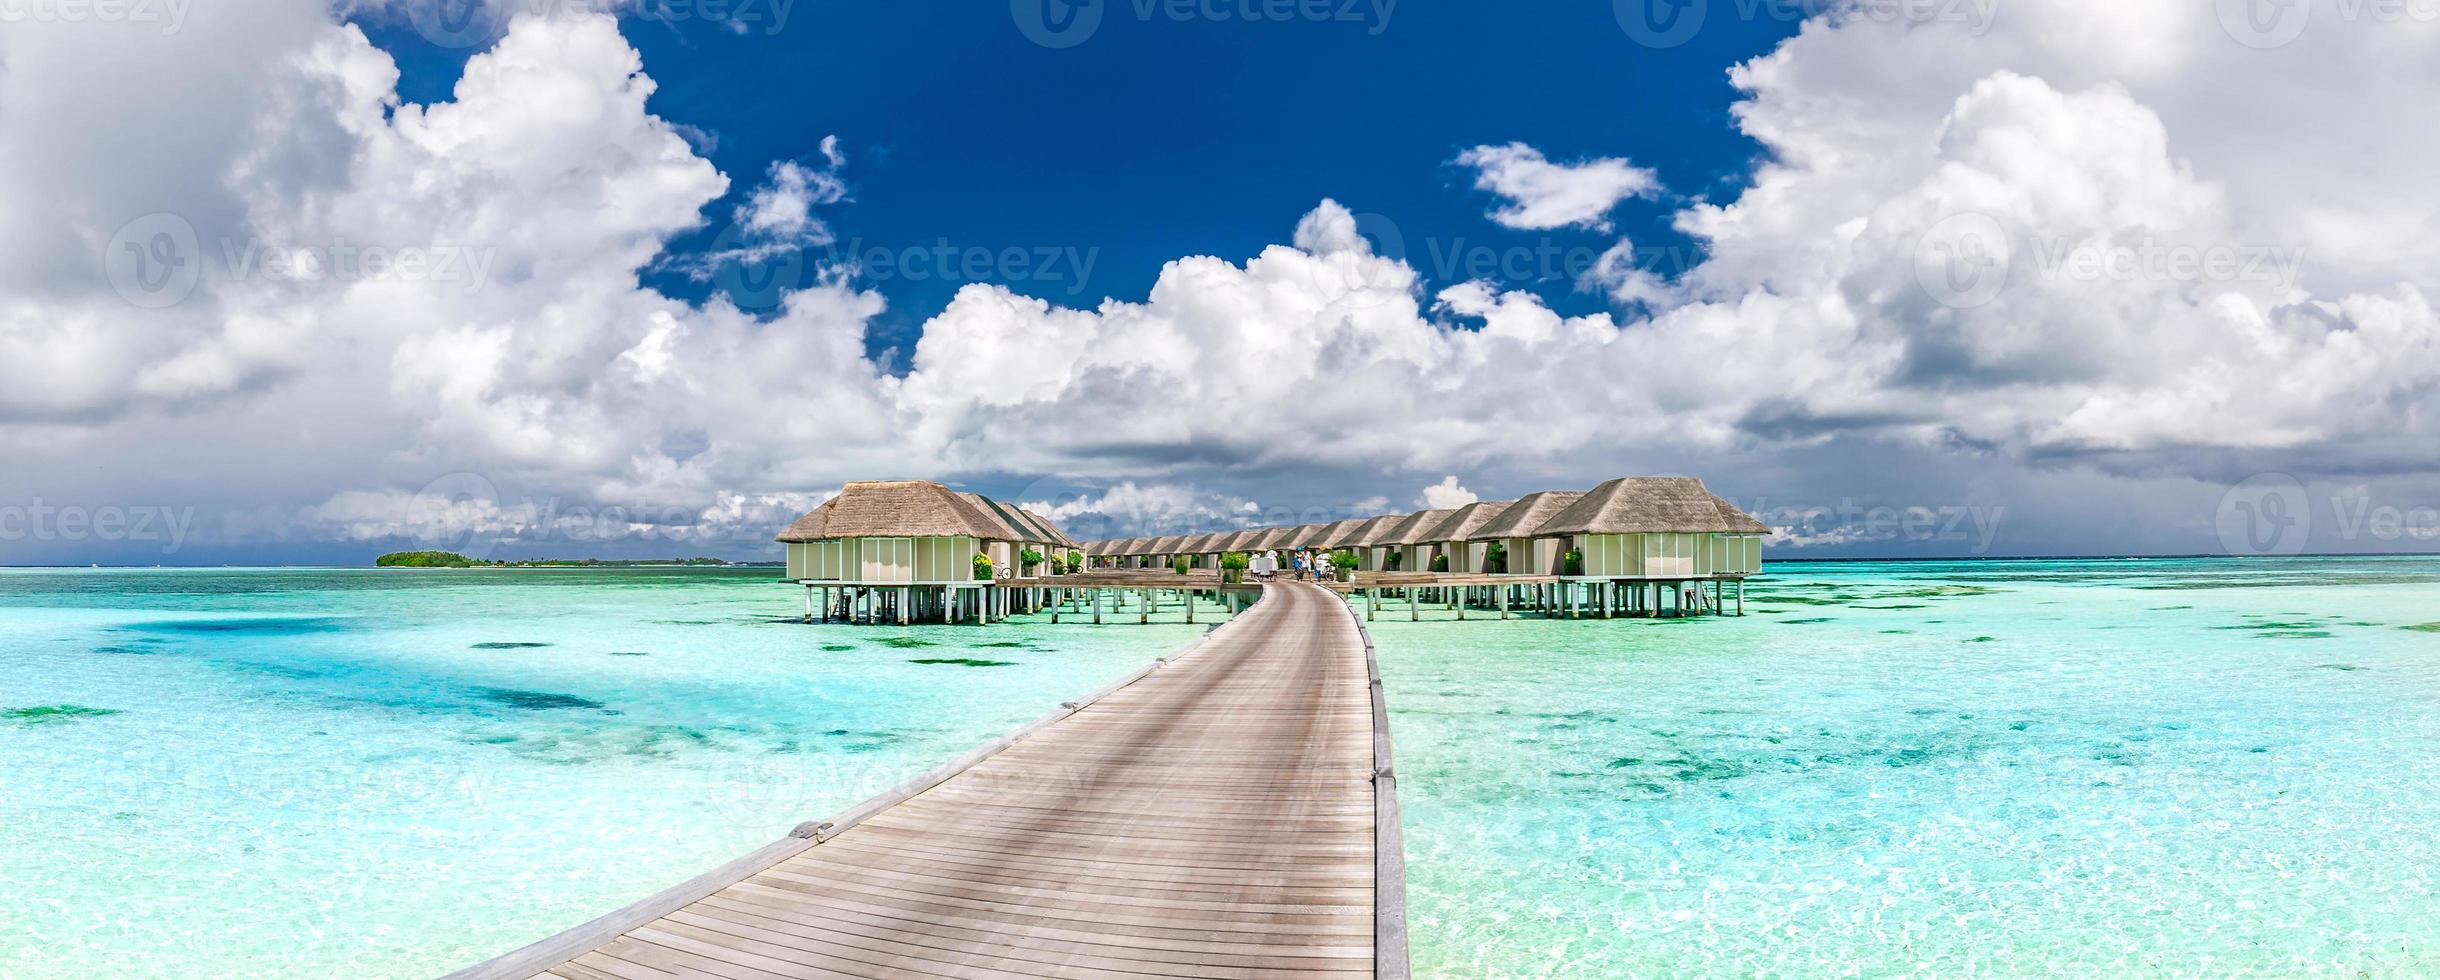 Maldives island beach panorama. Luxury water villas long wooden pier pathway. Tropical vacation and summer holiday background concept. Amazing scenery with copy space photo